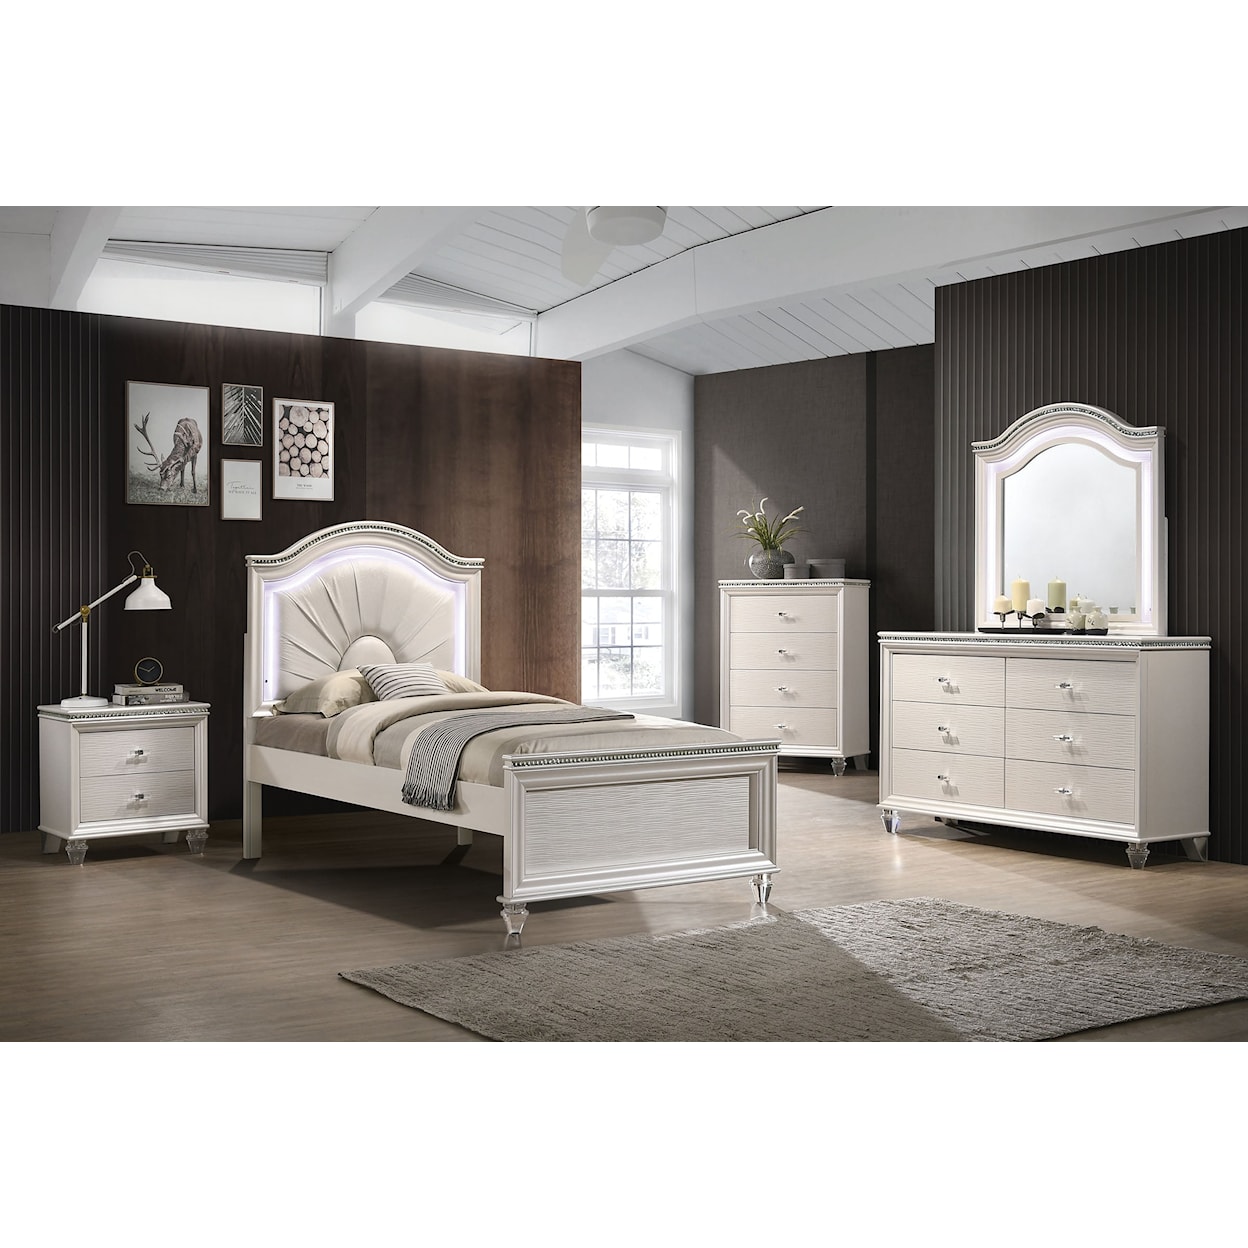 Furniture of America - FOA Allie Full Bed with Upholstered Headboard